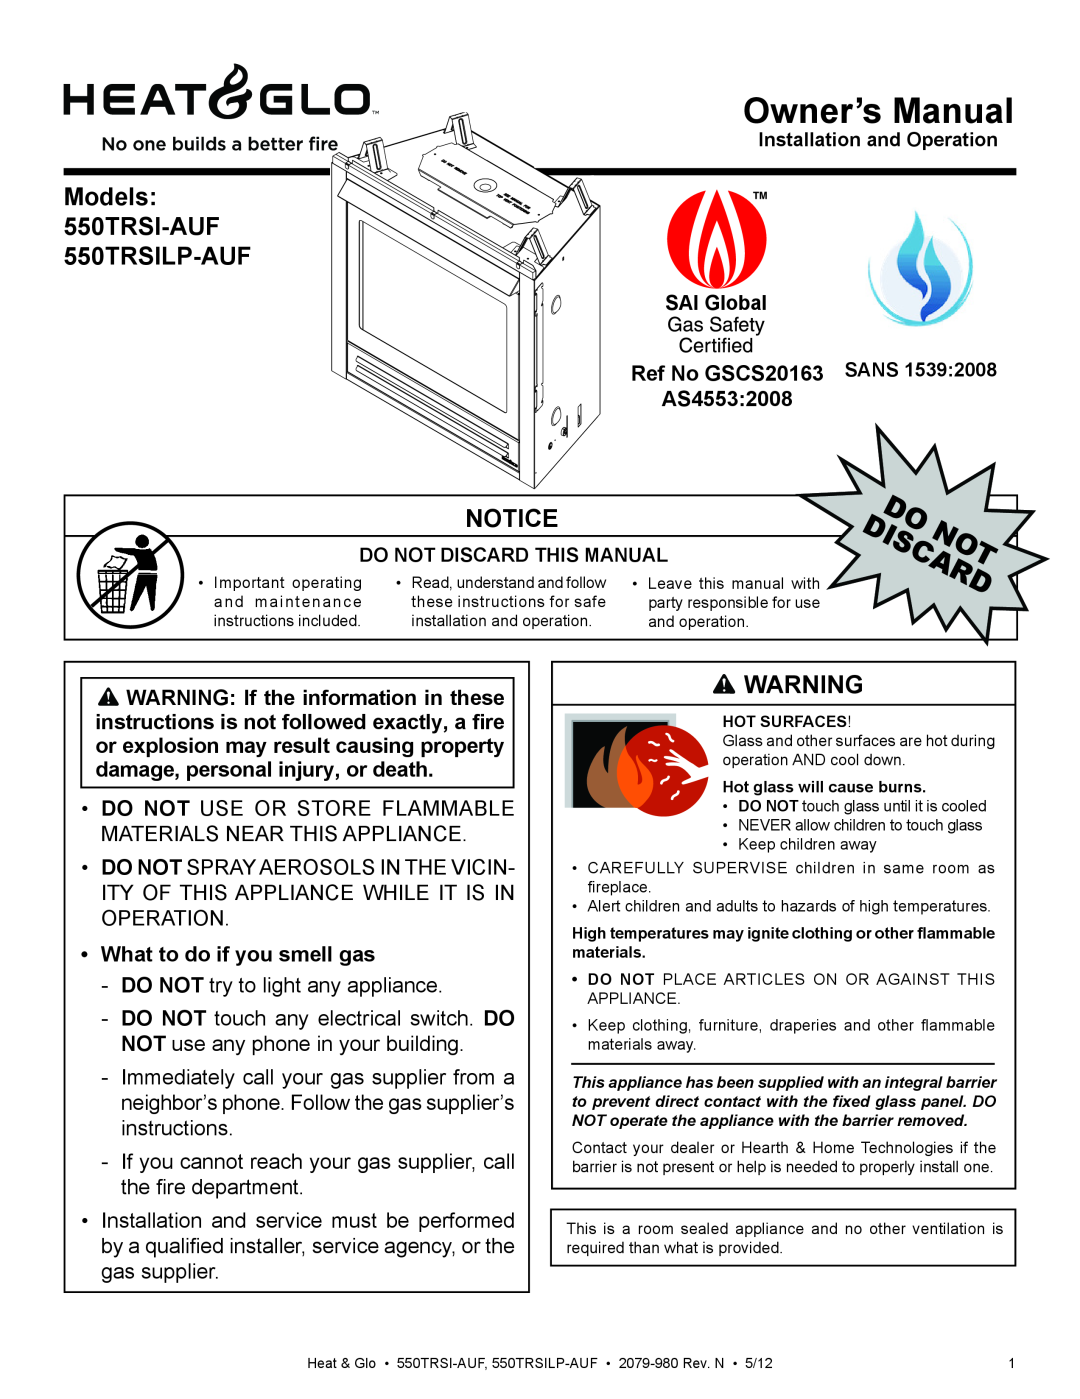 Heat & Glo LifeStyle owner manual Models: 550TRSI-AUF 550TRSILP-AUF, Notice, What to do if you smell gas 